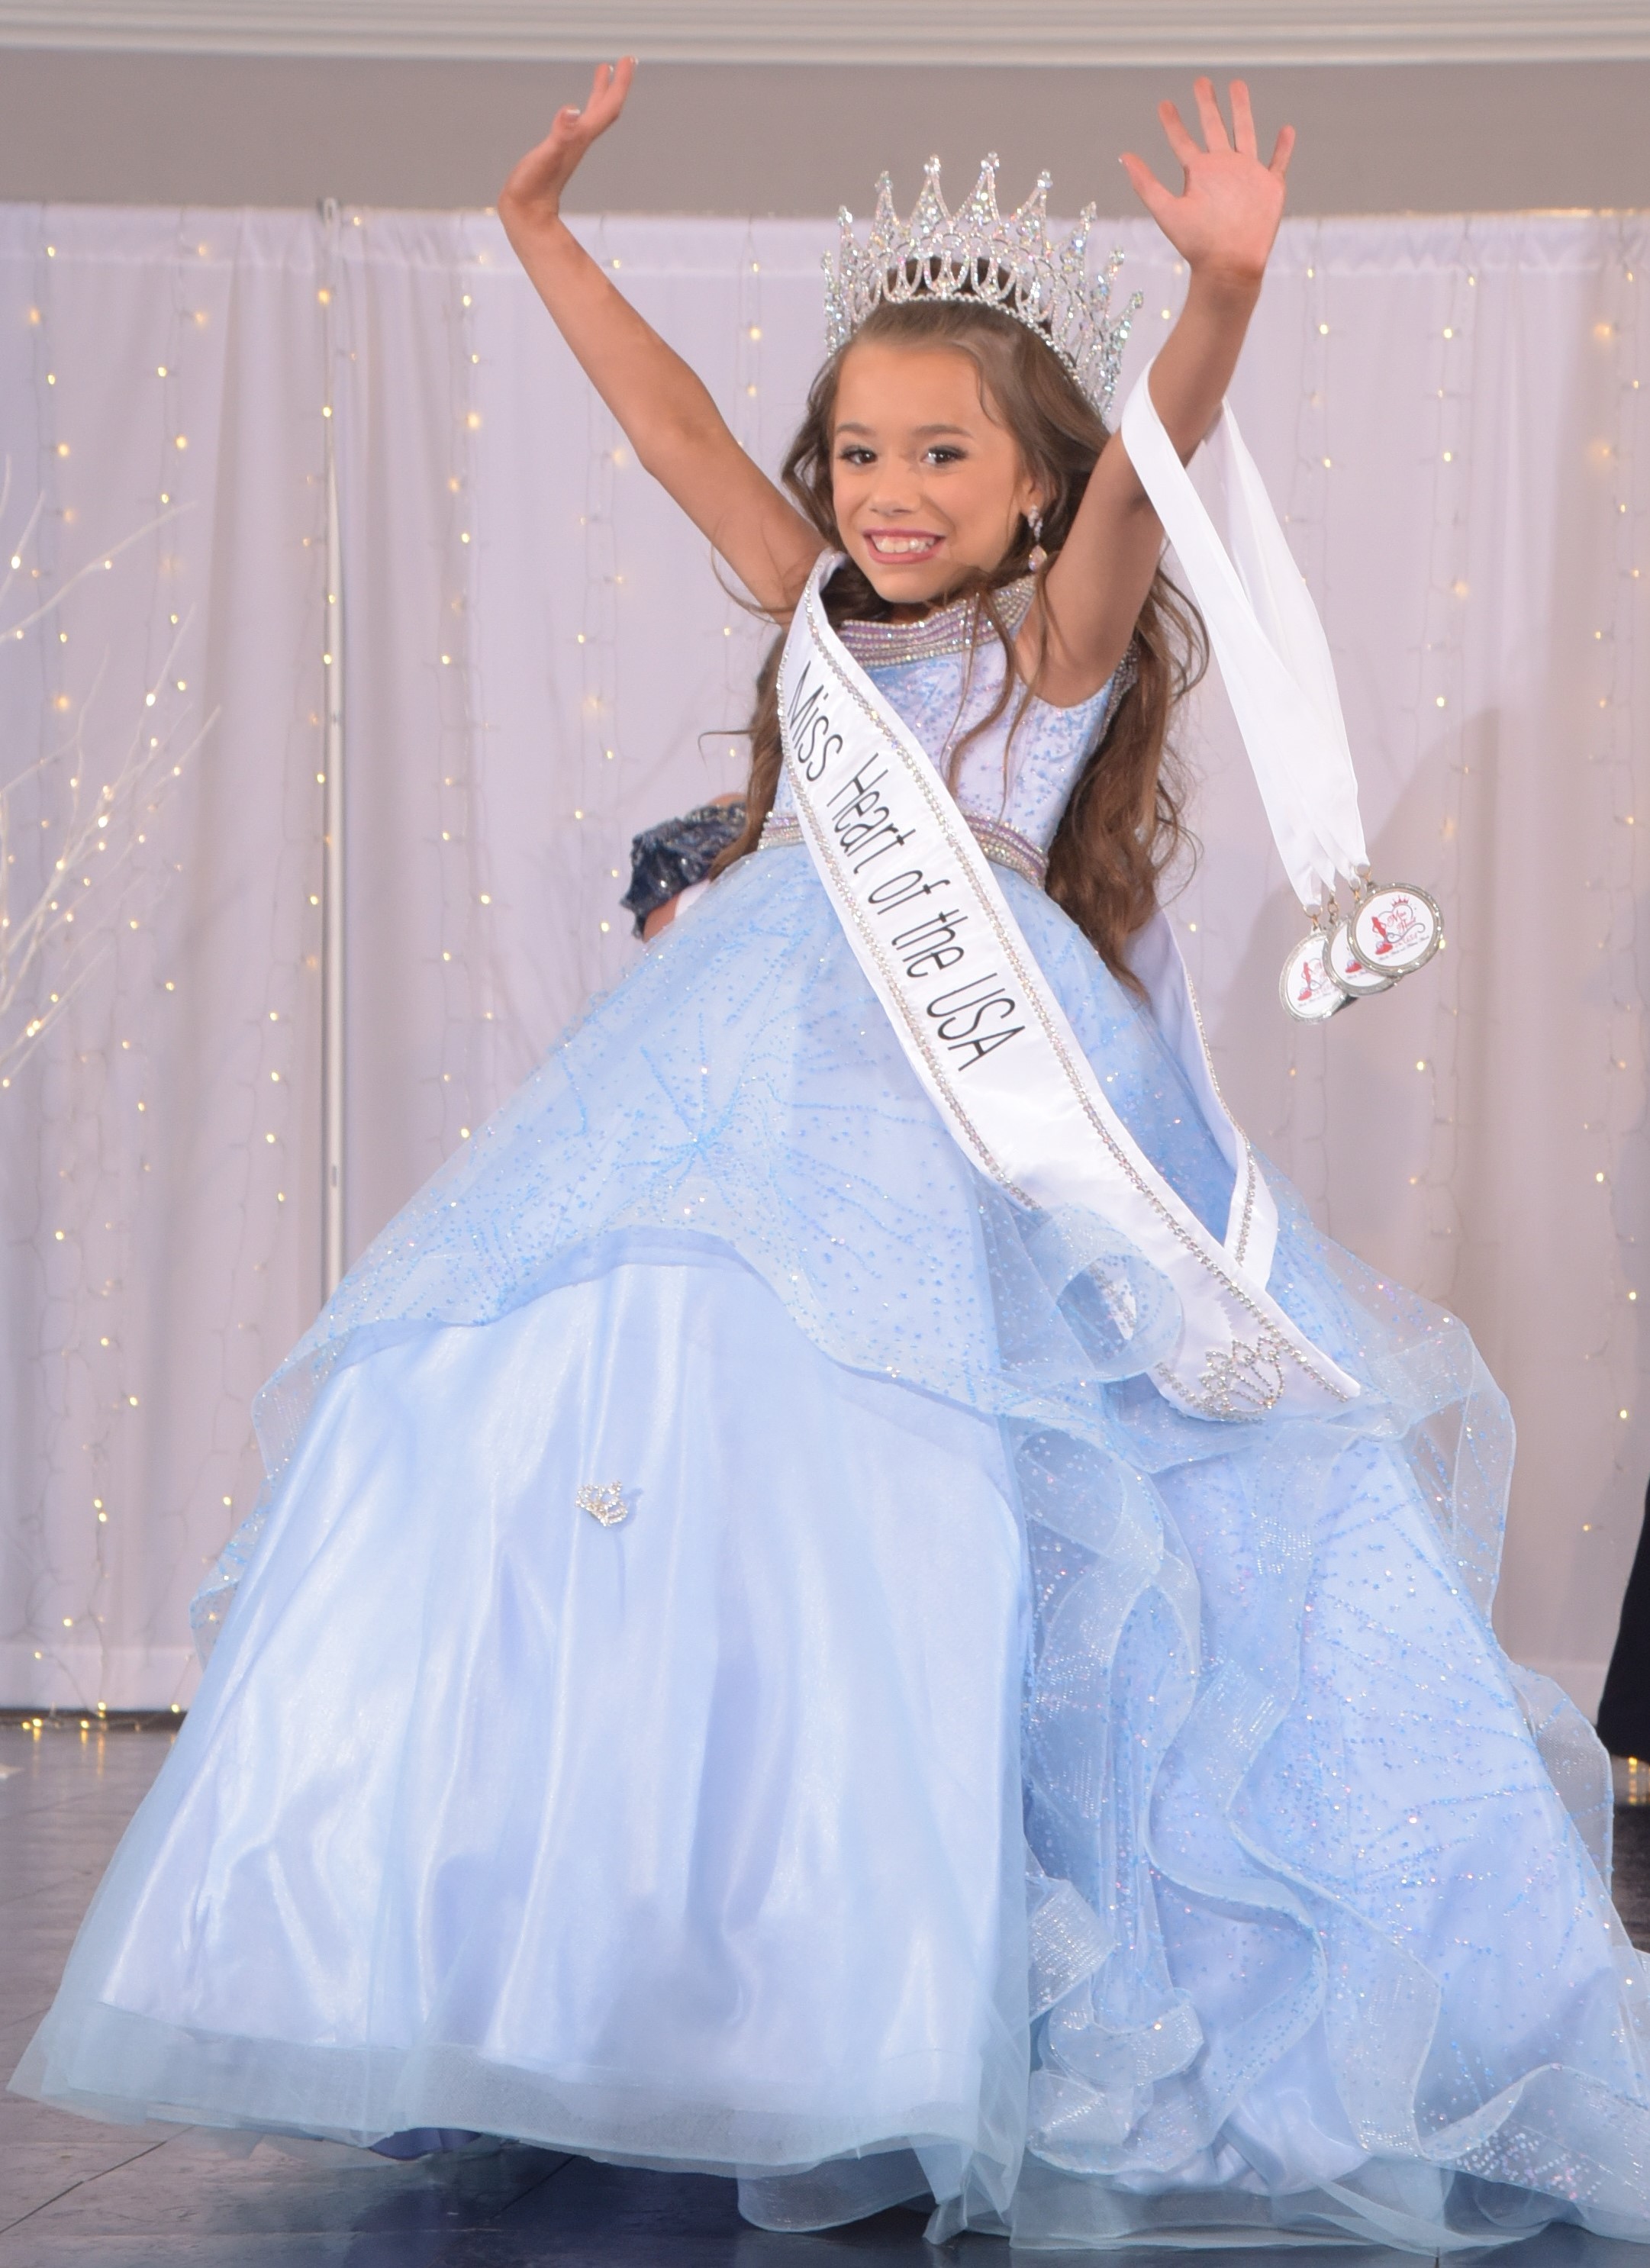 Charity Pageant Now Accepting Registrations for Miss Heart of the USA